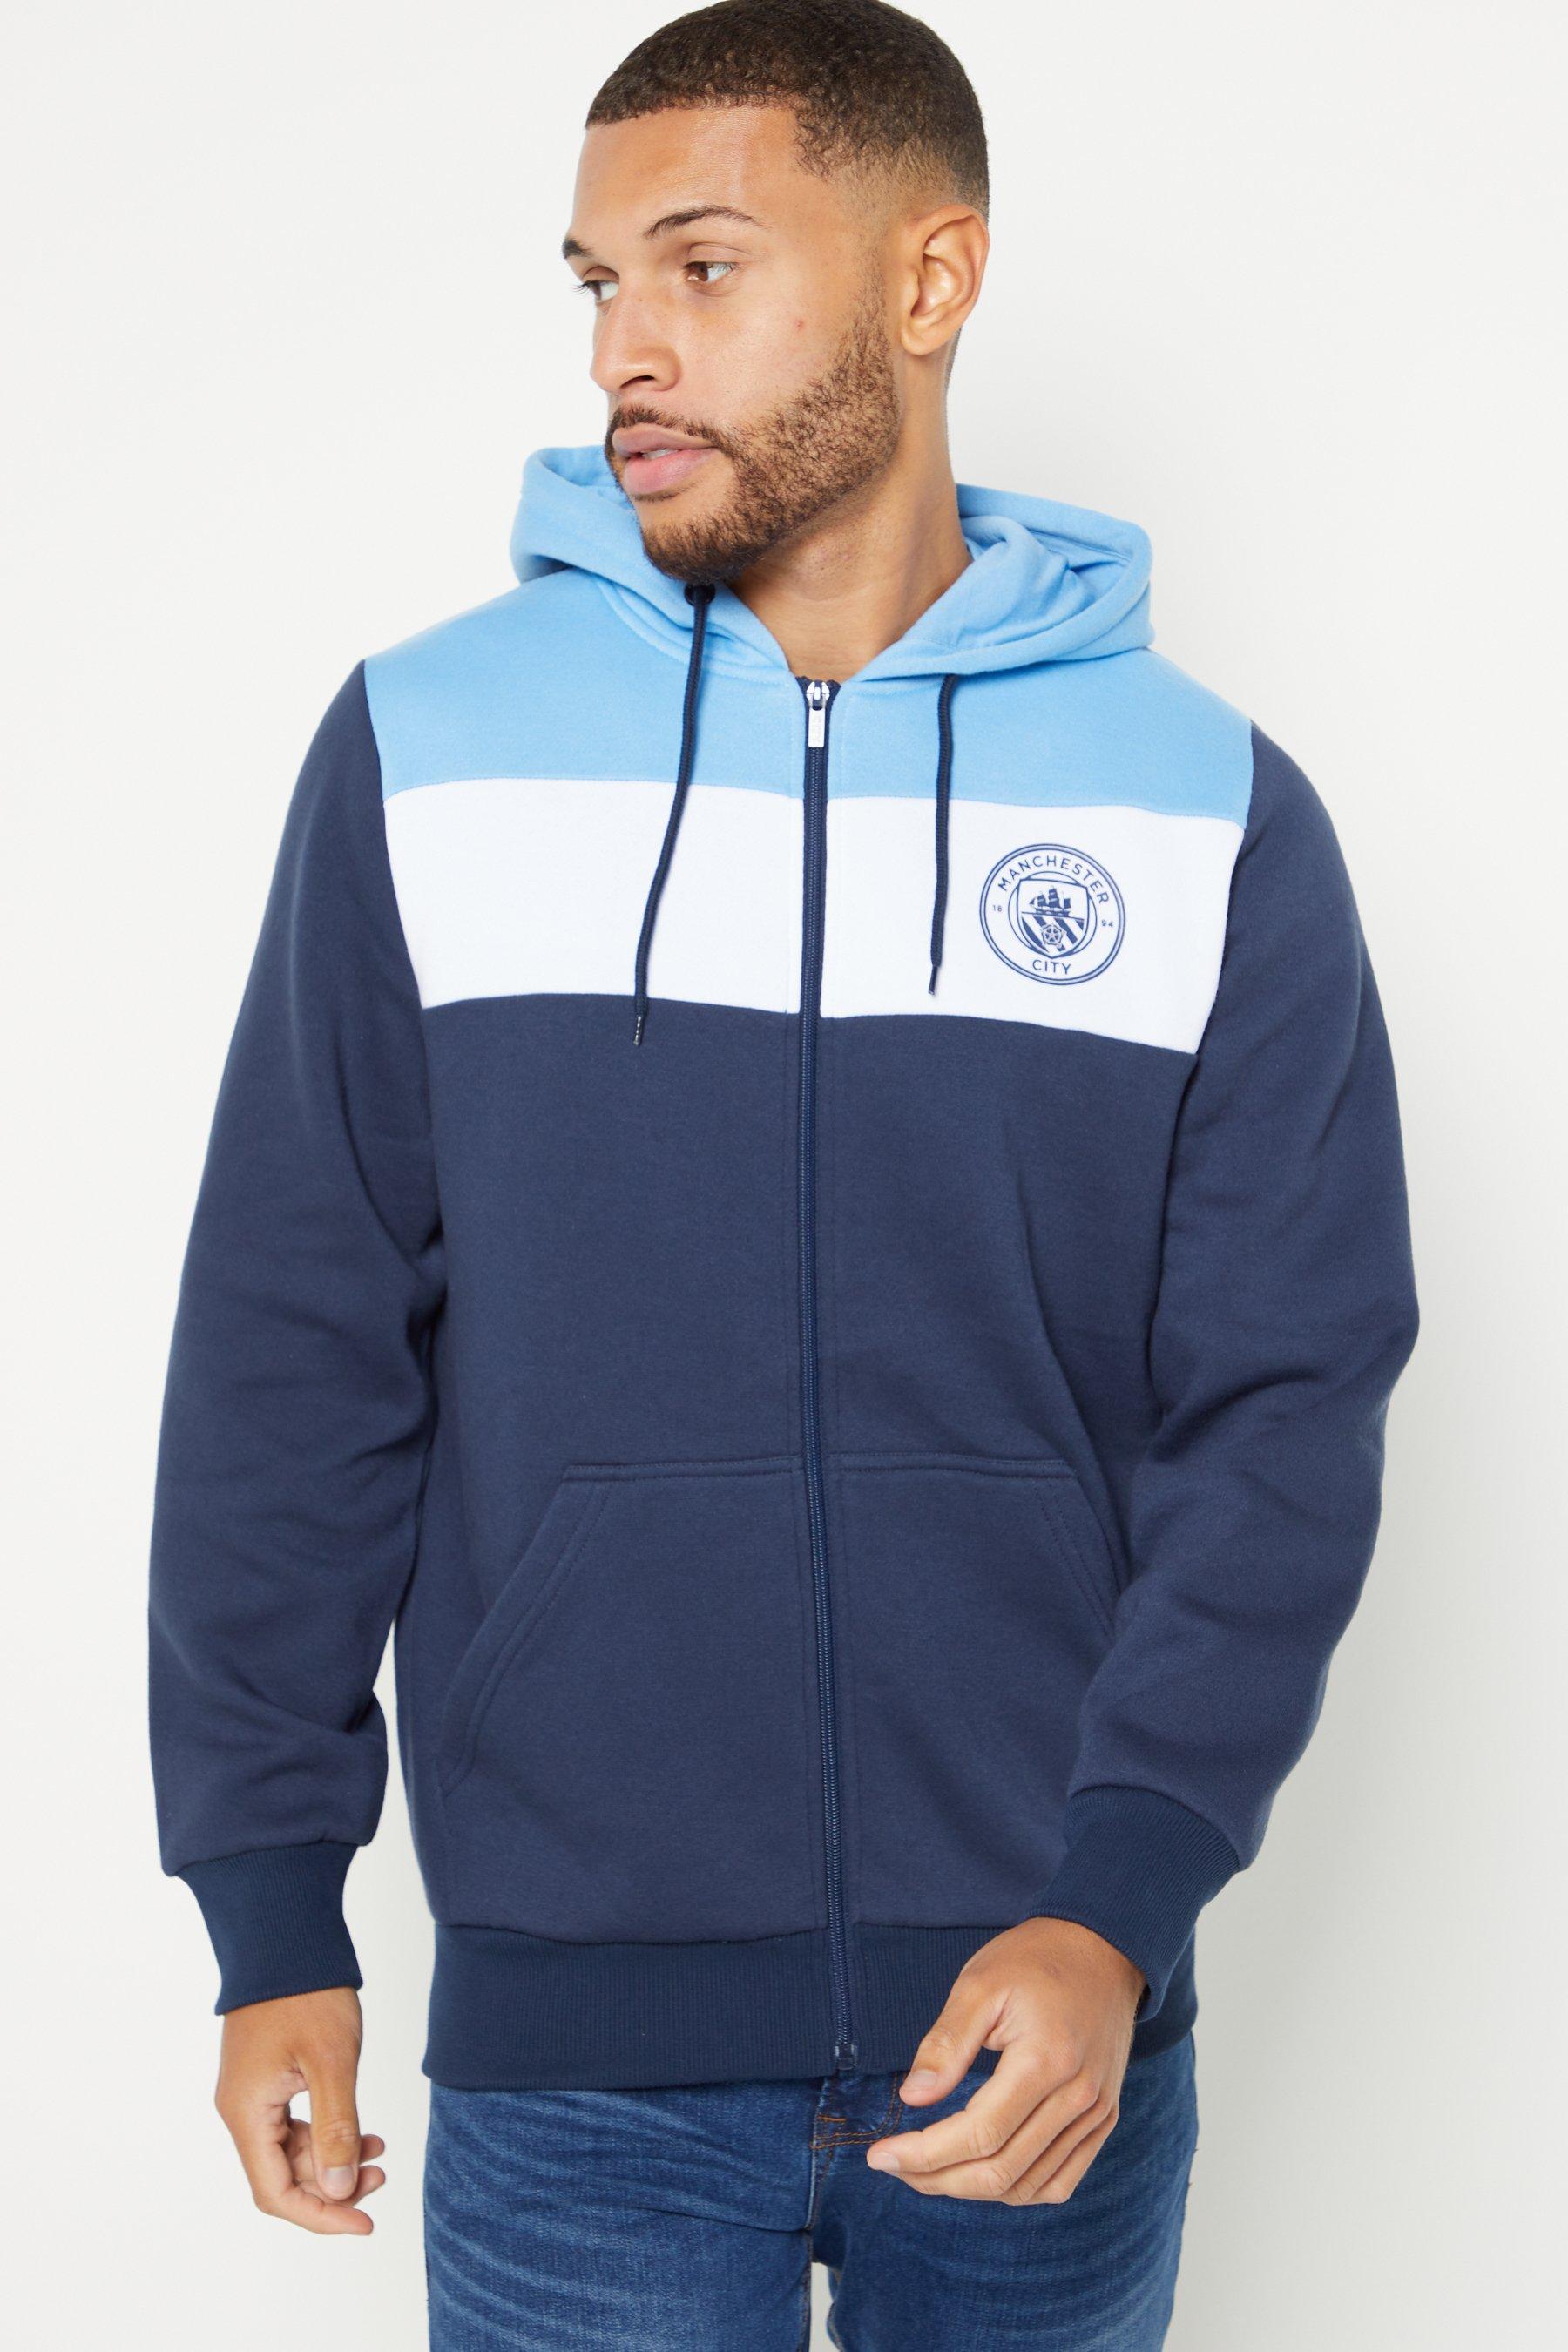 manchester city football club blue and white zip through hoody - mens - size: small